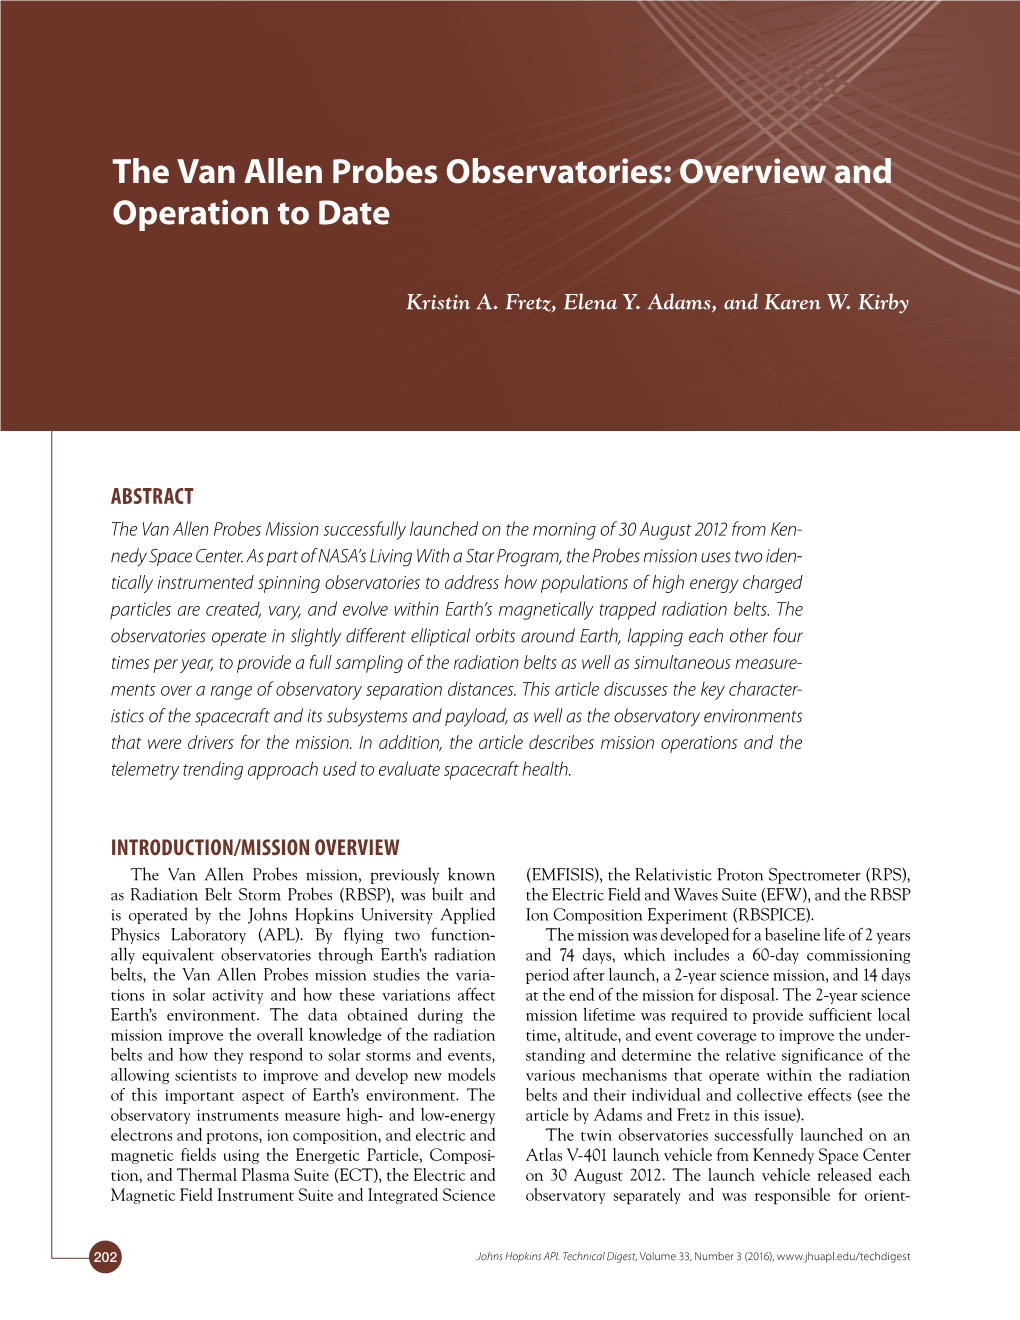 The Van Allen Probes Observatories: Overview and Operation to Date